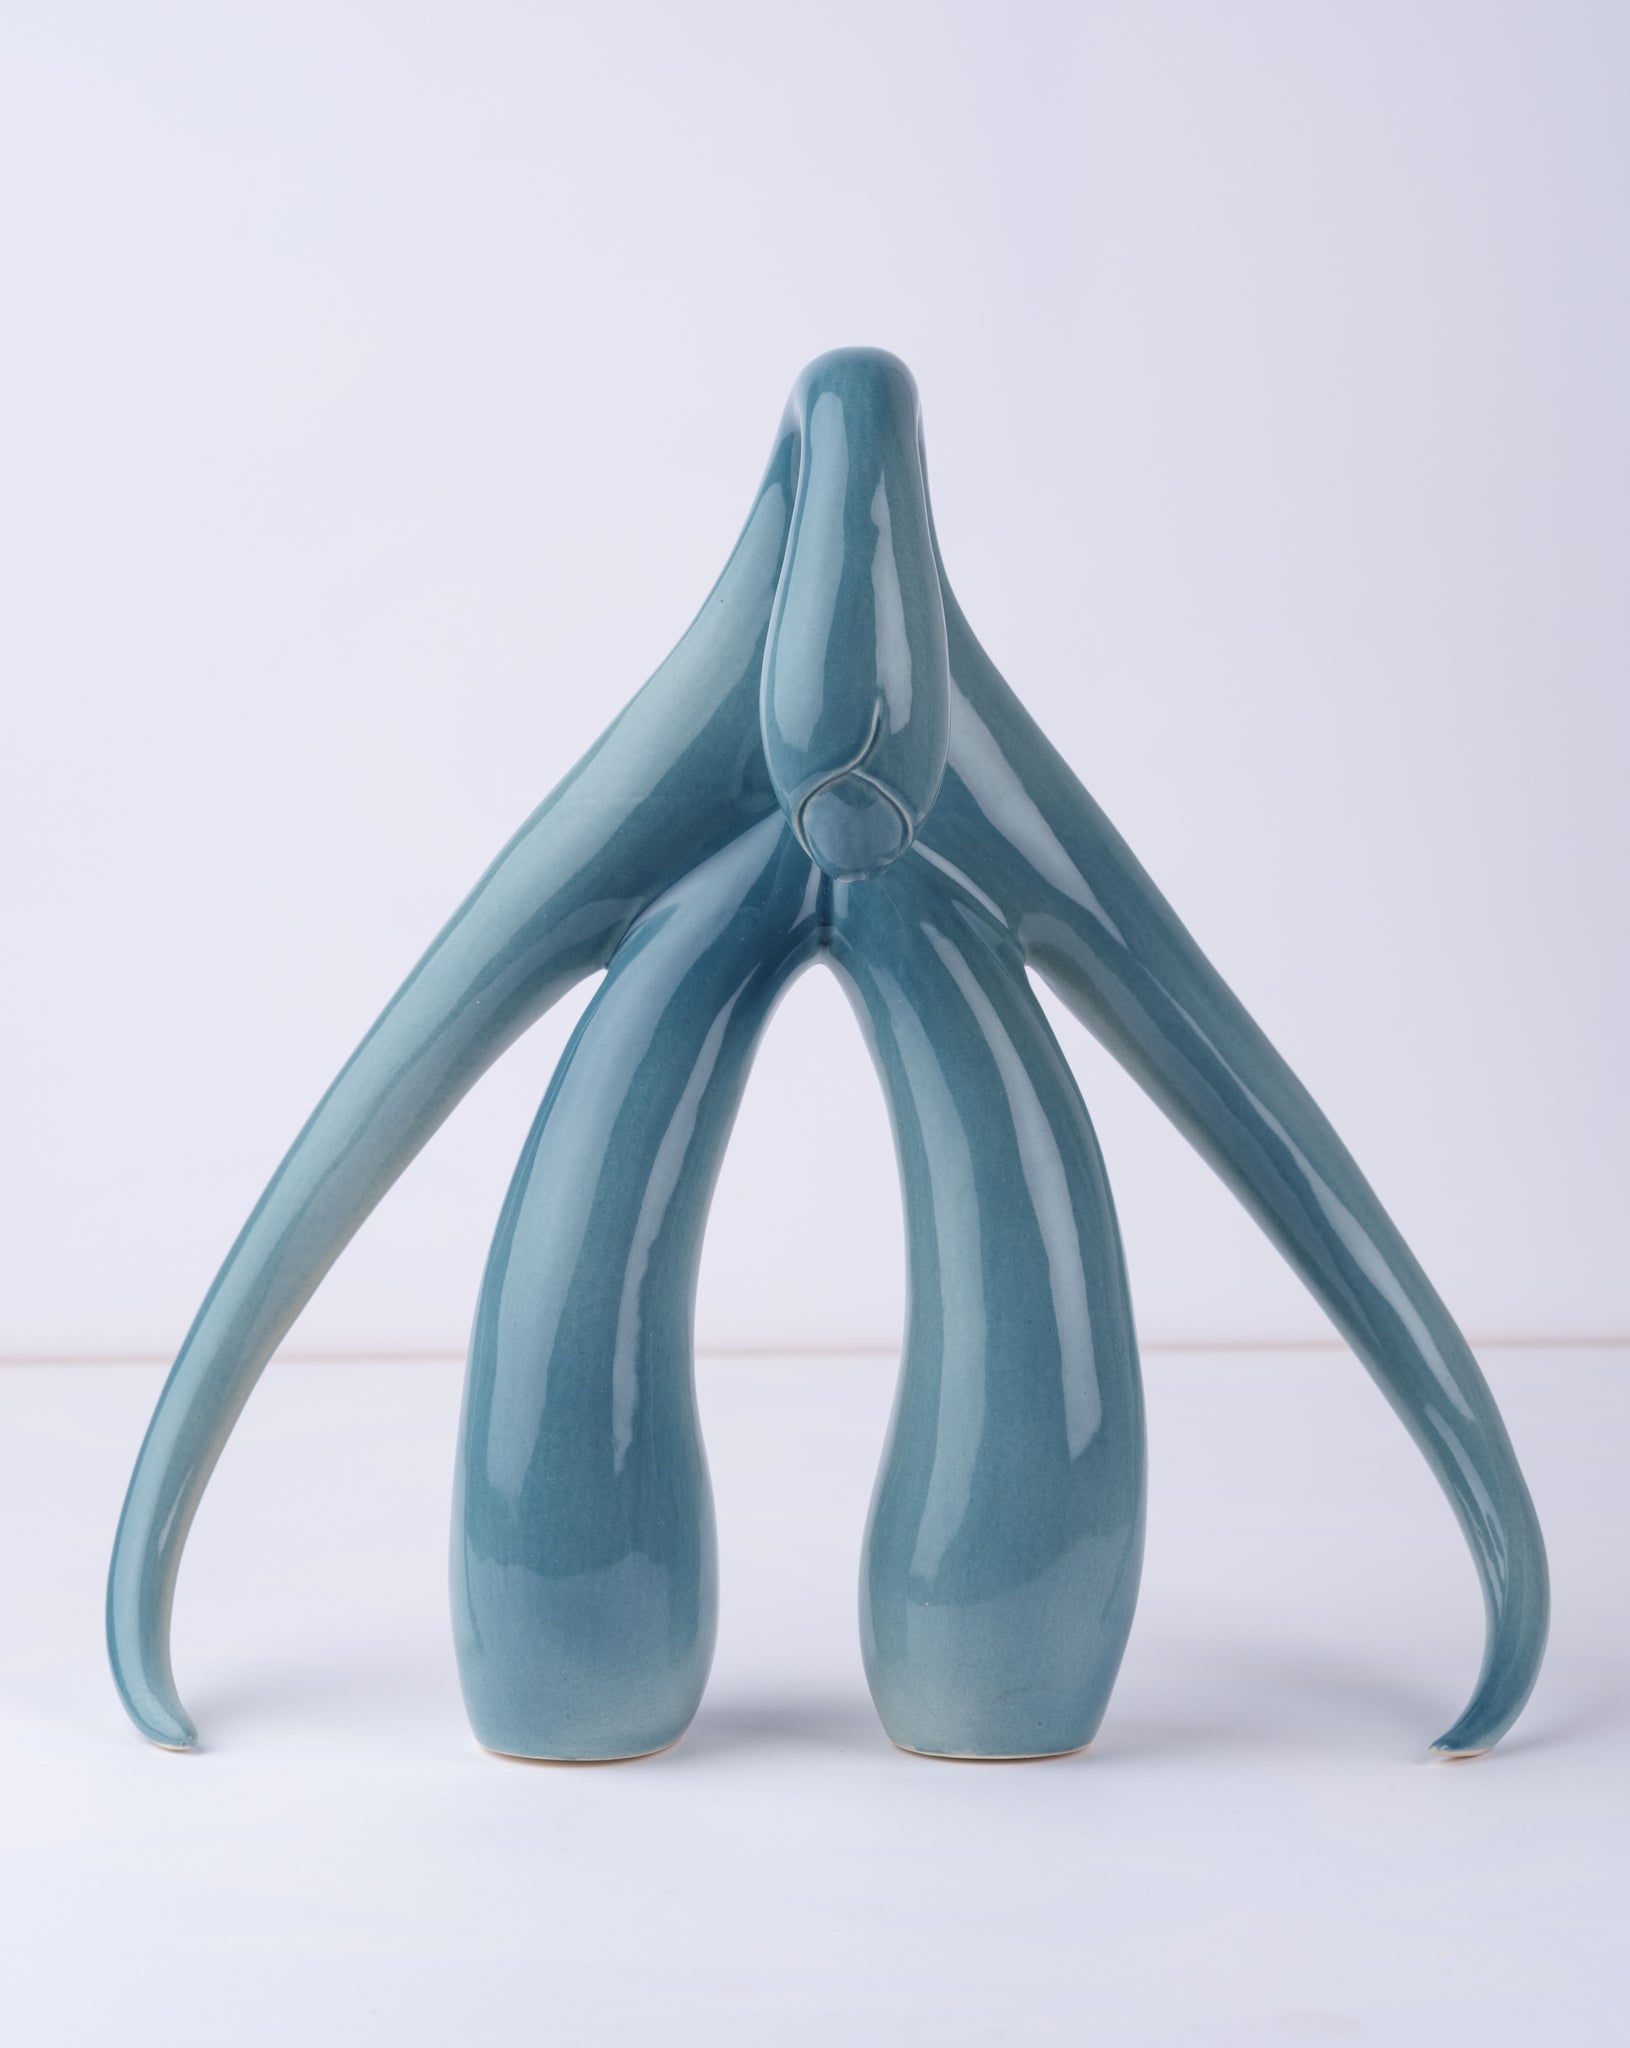 Front view of "Swan Series" ceramic sculpture in aqua by Sophia Wallace, 2022.f